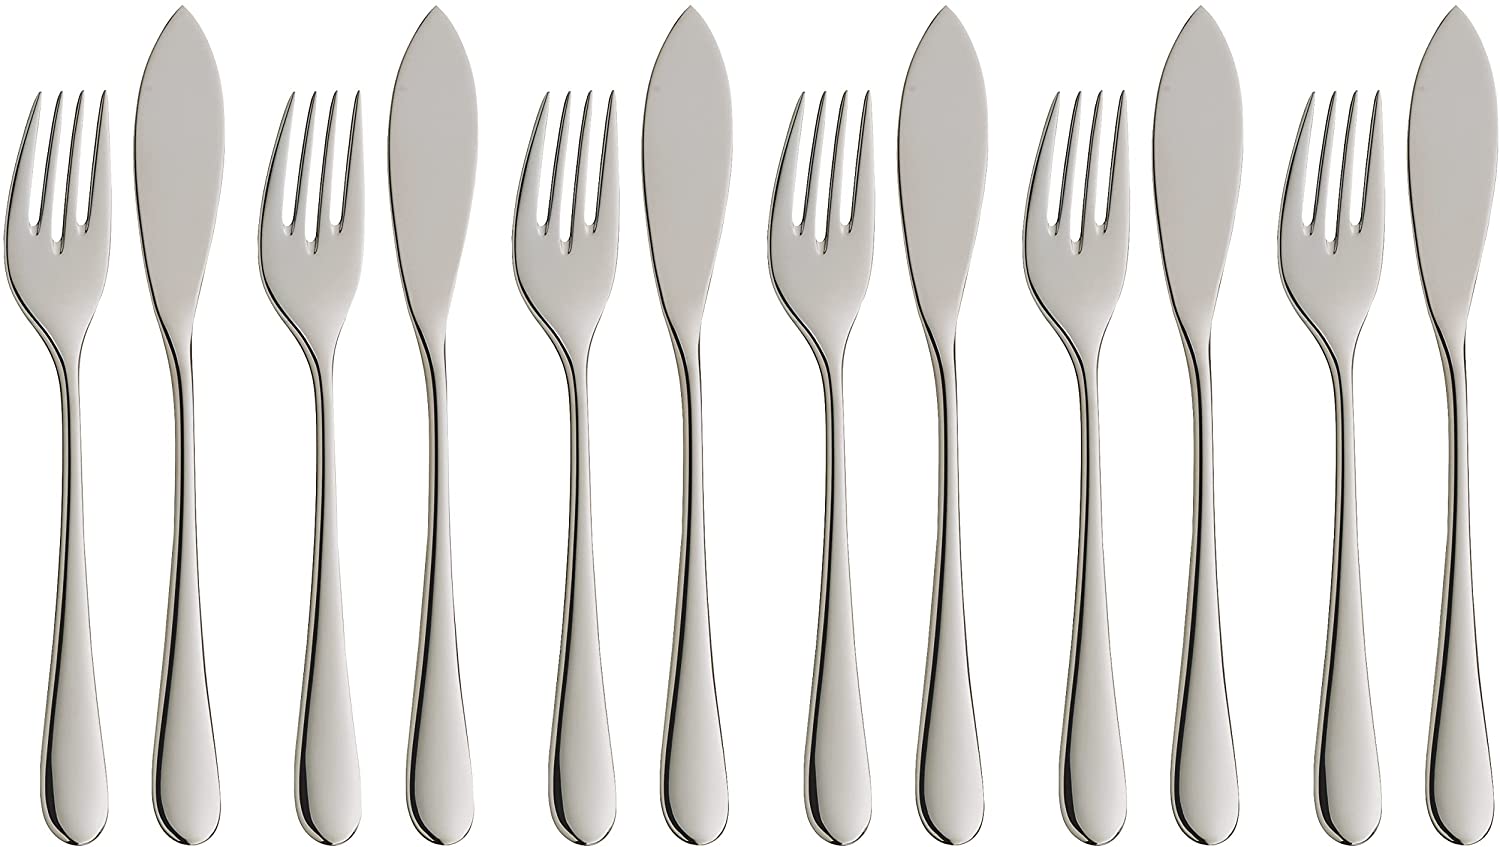 WMF Merit 1140356346 Fish Cutlery Set Cromargan Protect Stainless Steel 12 Pieces